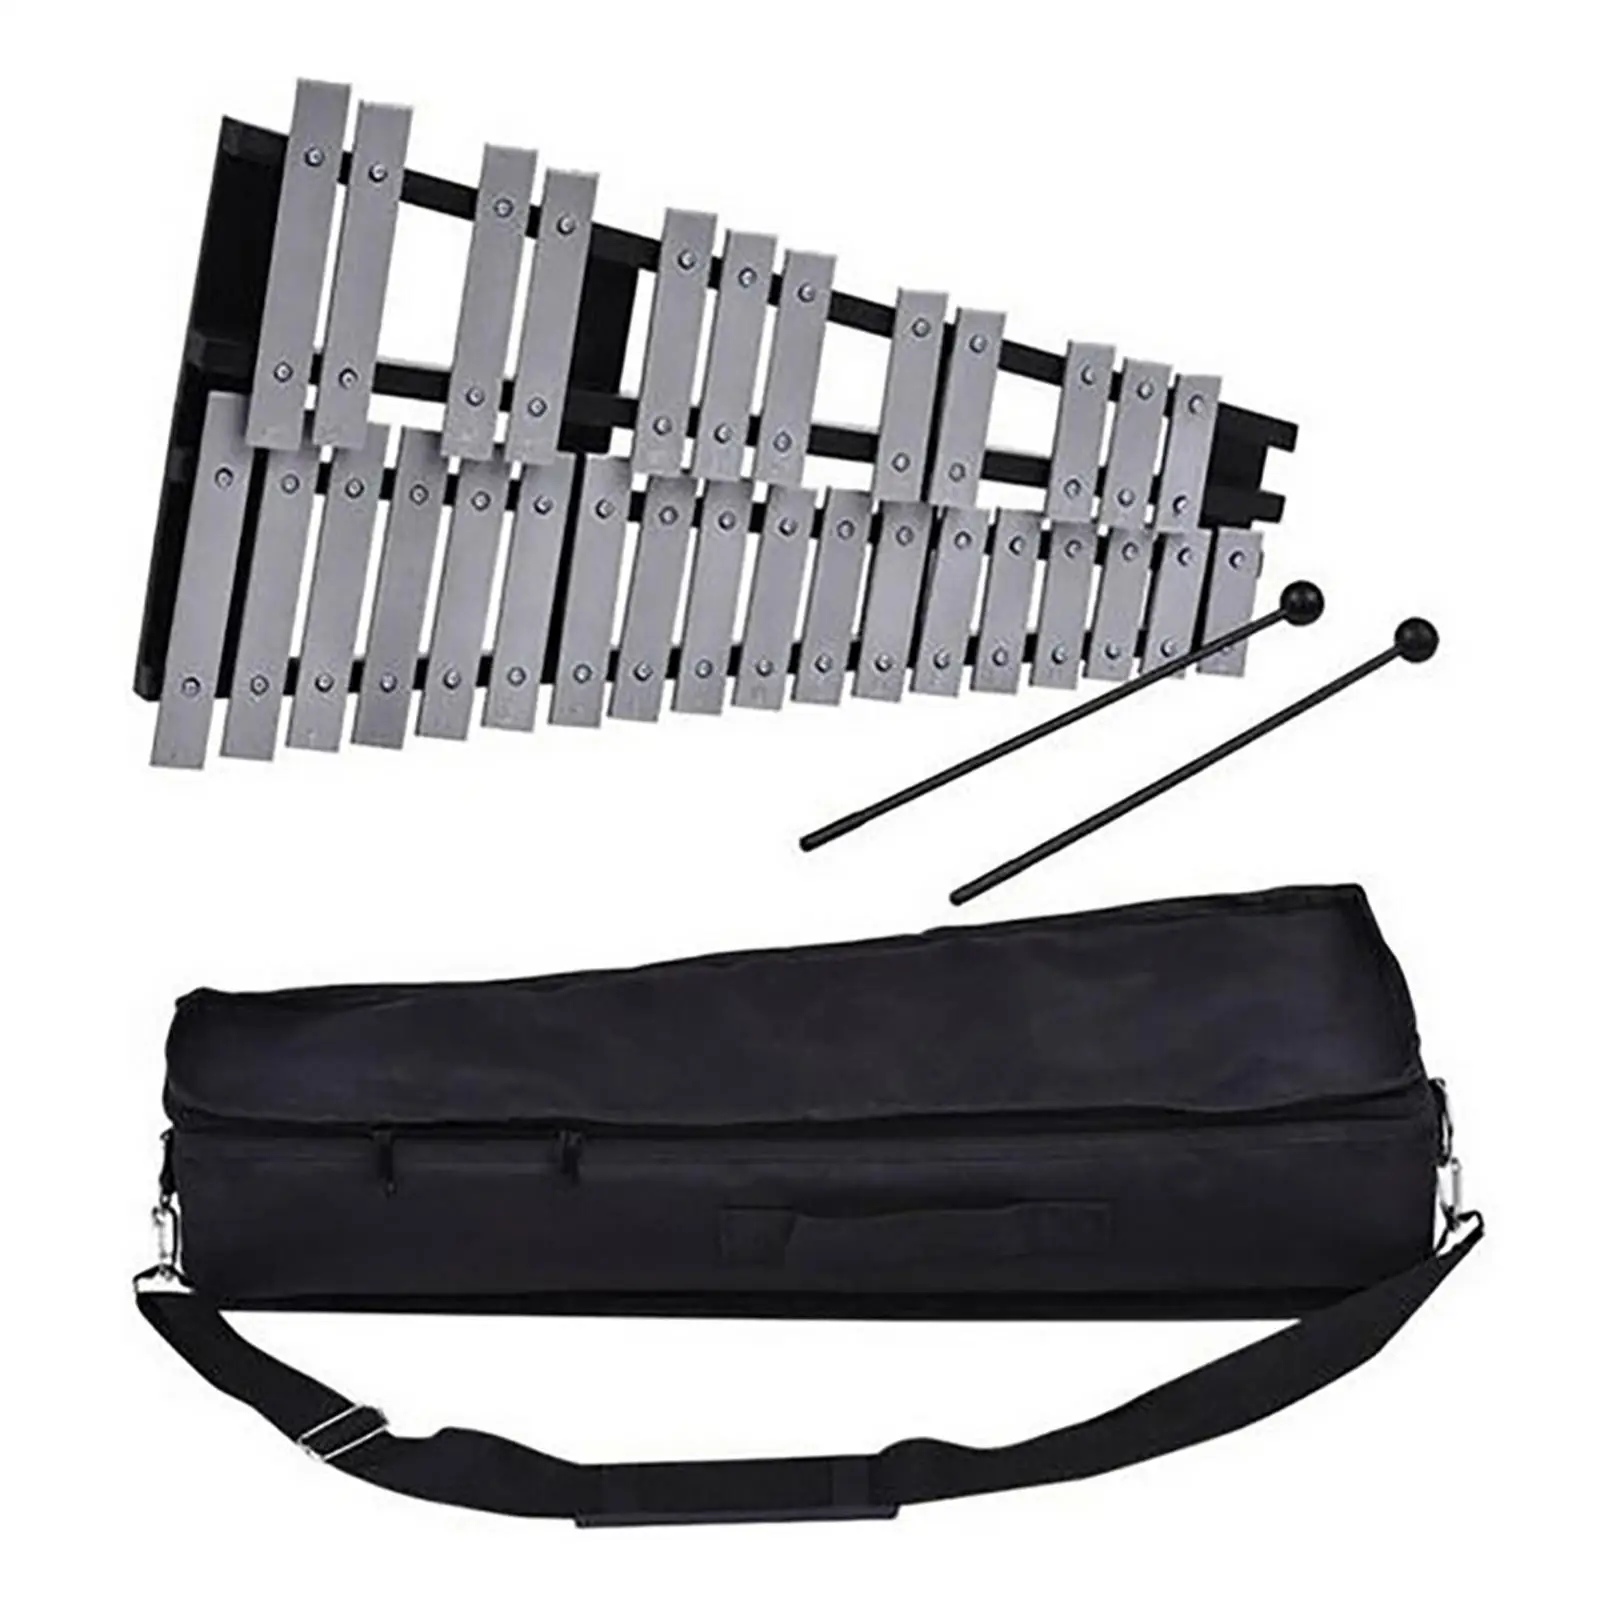 Professional 32 Notes Foldable Glockenspiel Xylophone and Carrying Bag for Beginner